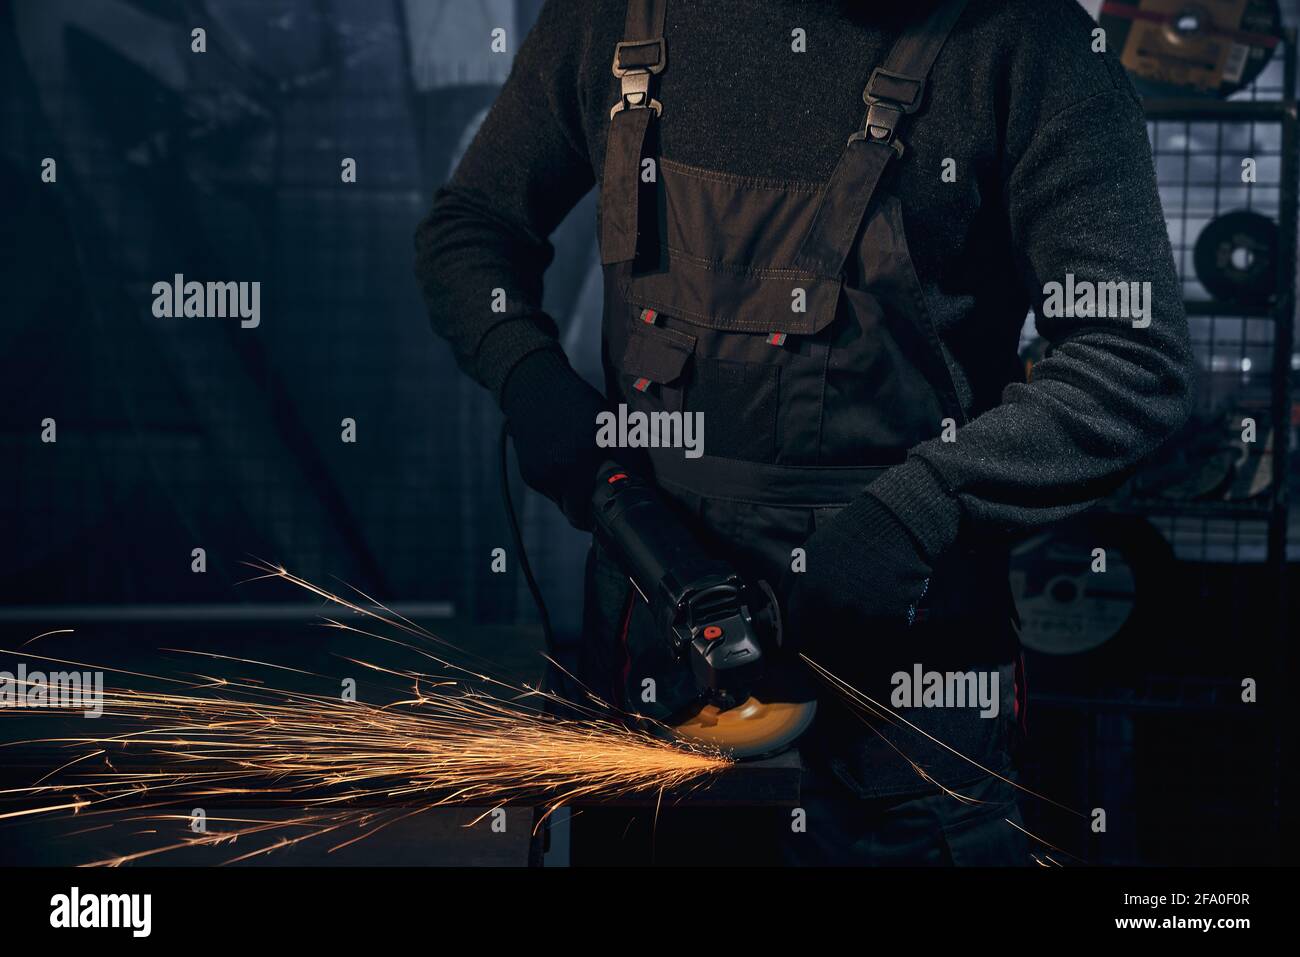 Close up of worker in special black suit and gloves working with special equipment for metal. Concept of man polishing metal in dark room or garage with angle grinder. Stock Photo